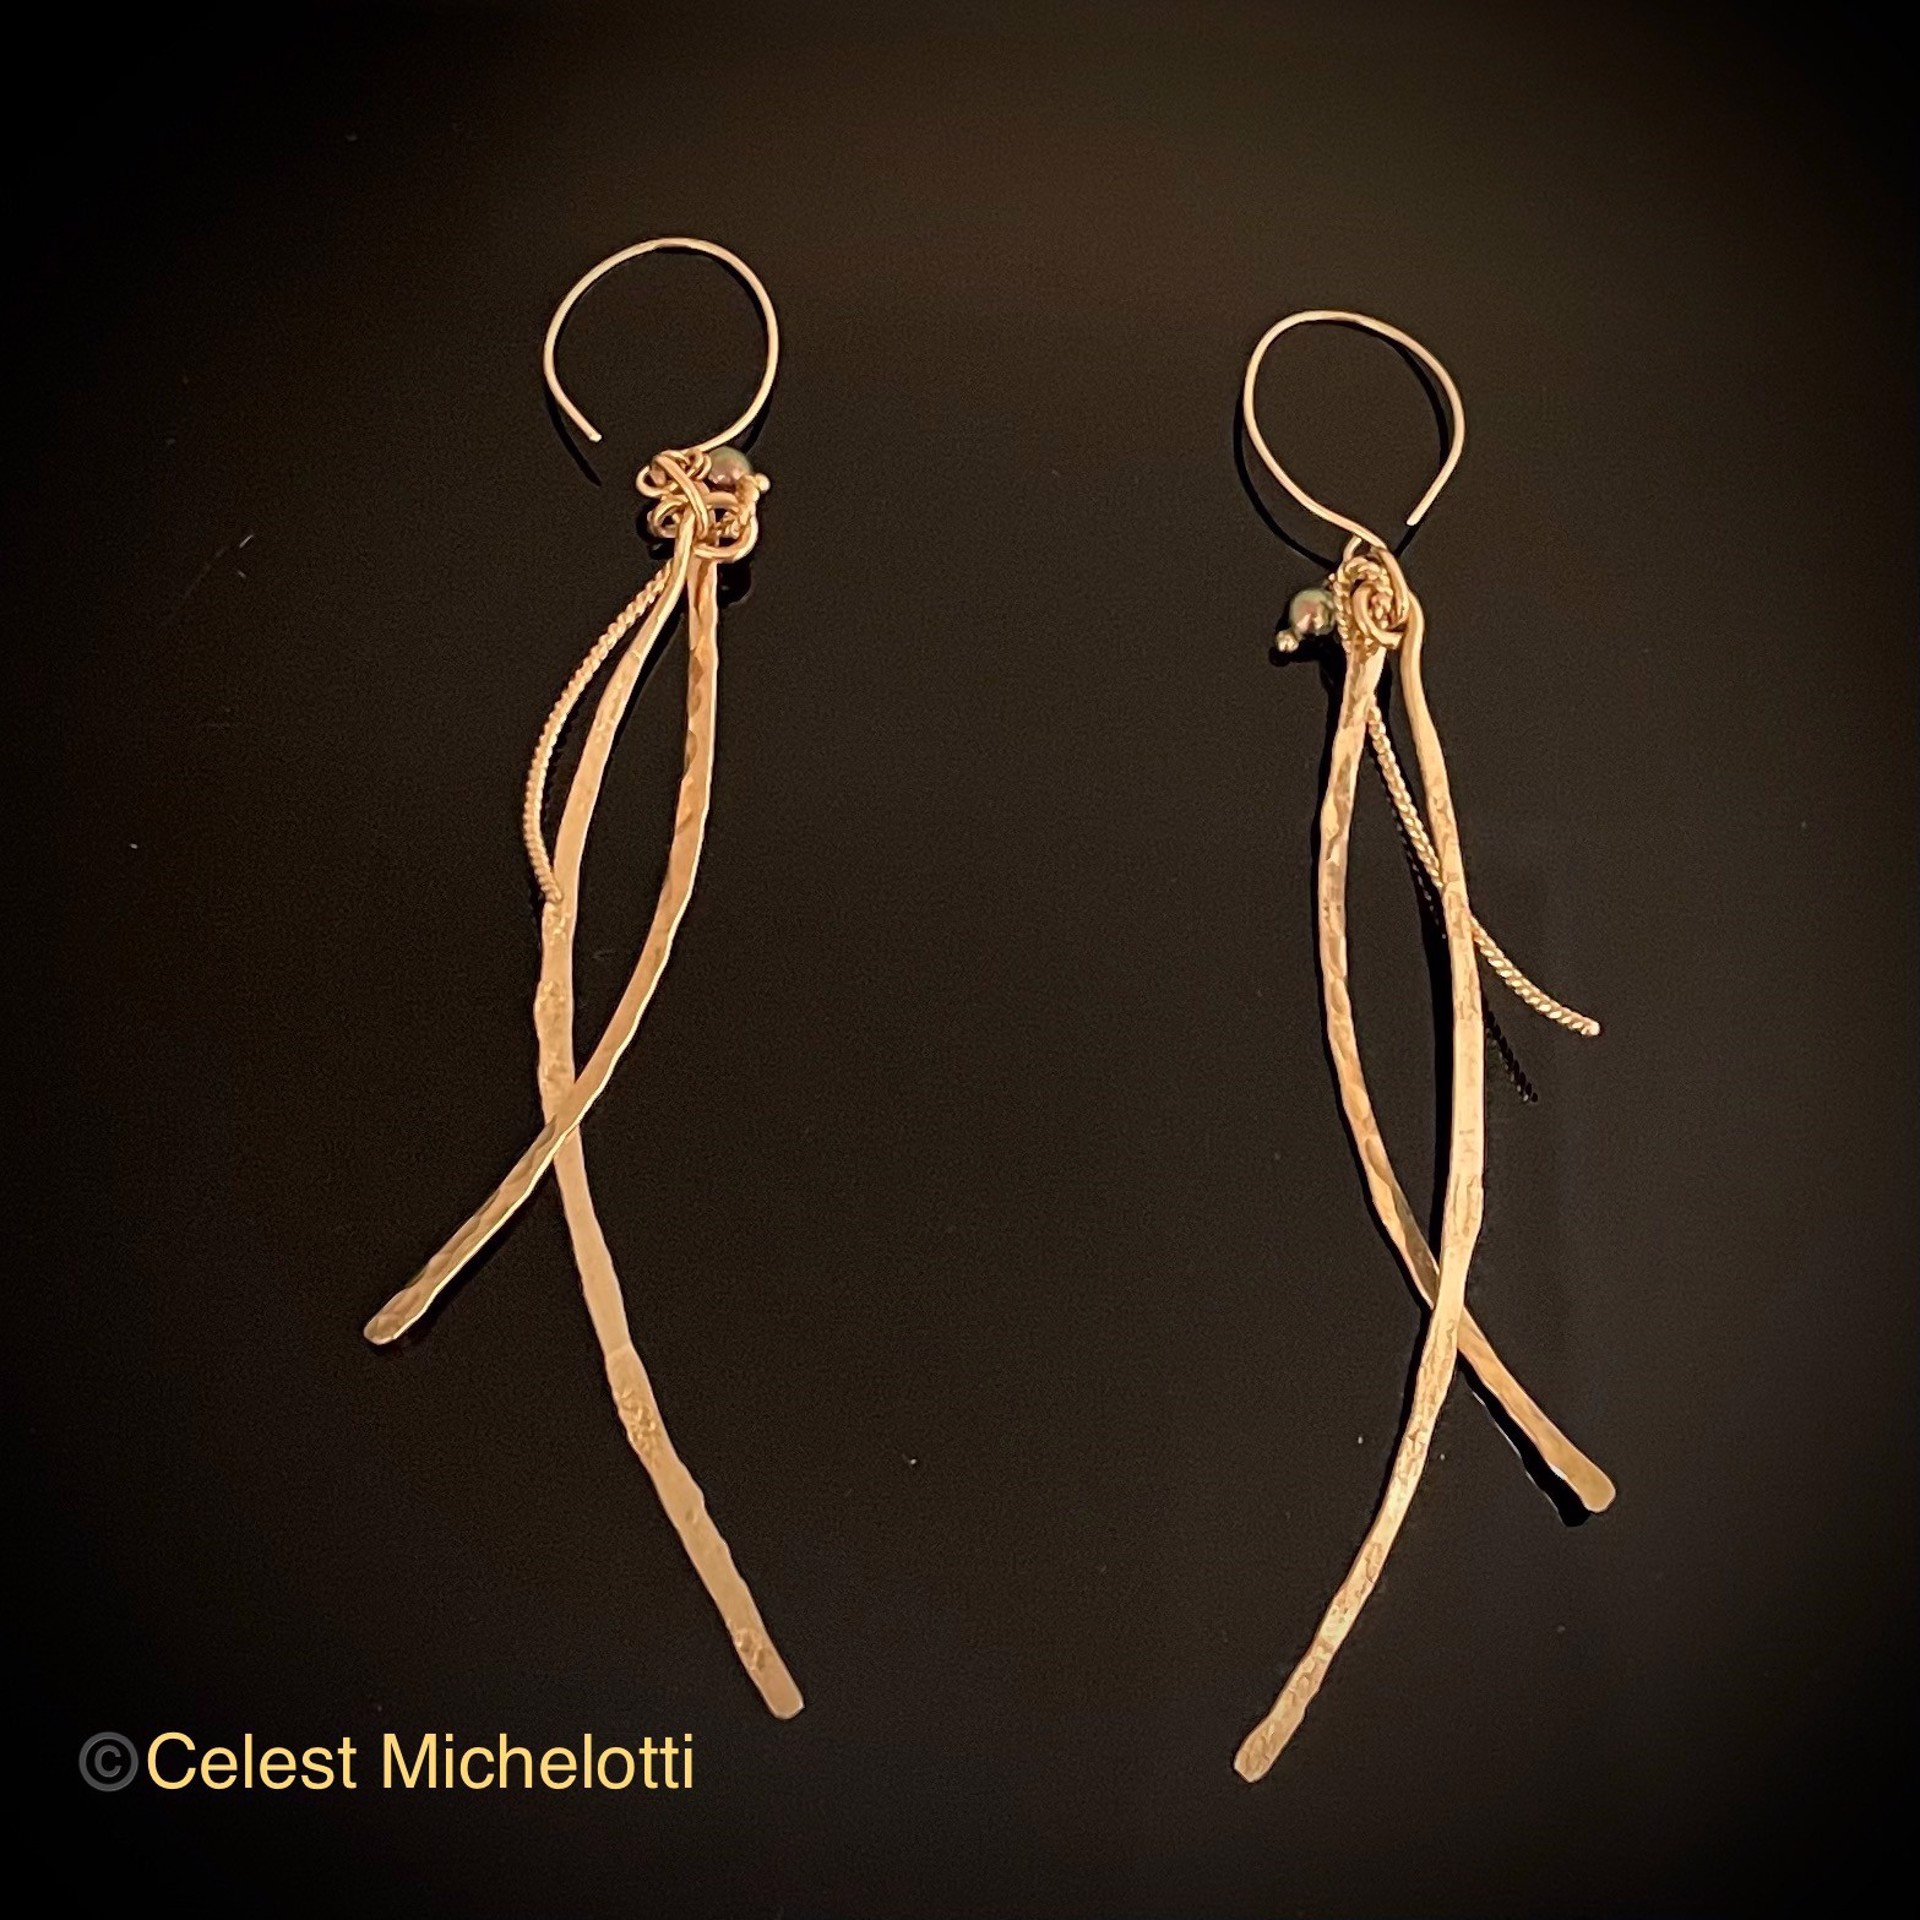 Fireworks, Earrings, 3 in., 14K Gold Filled, Black Pearls with Green and Plum Overtones. Hangs to Side by Celest Michelotti